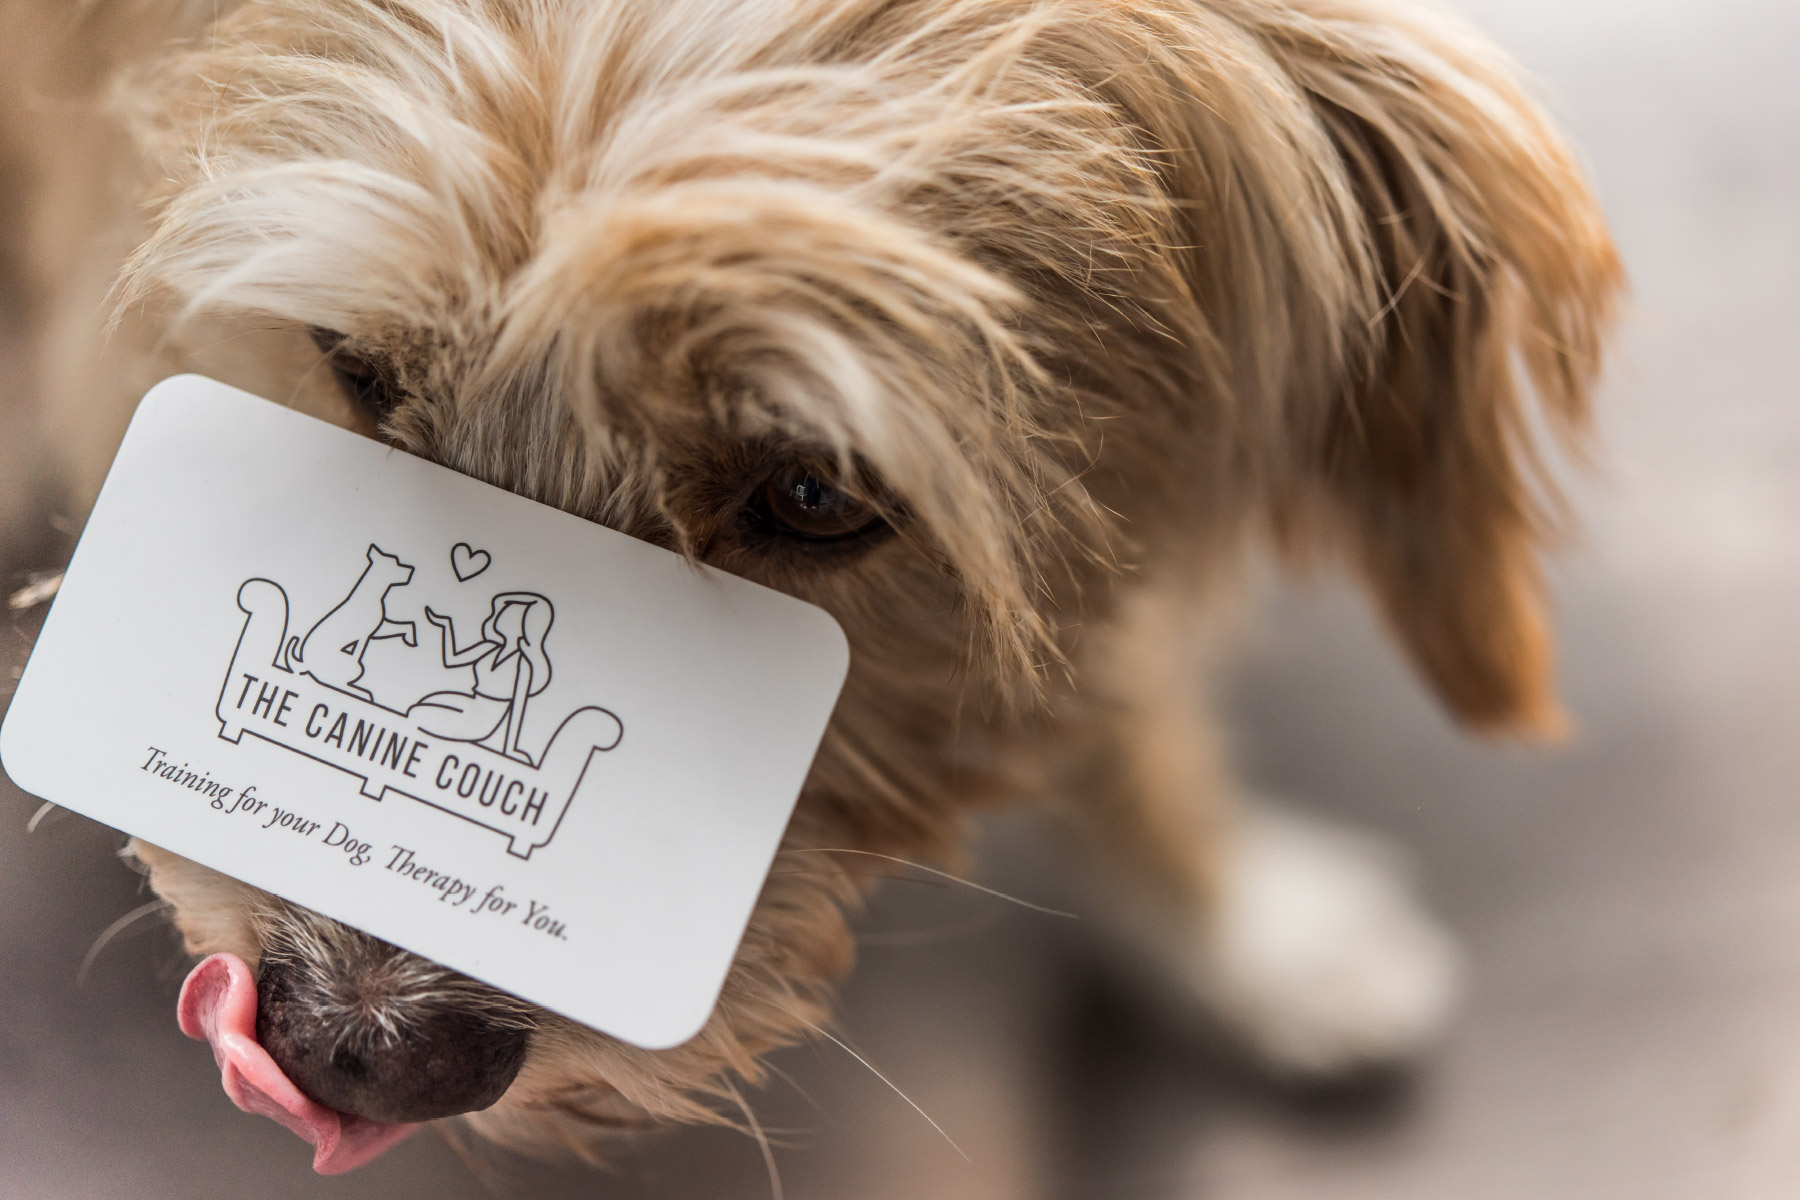 Puppy with business card on nose